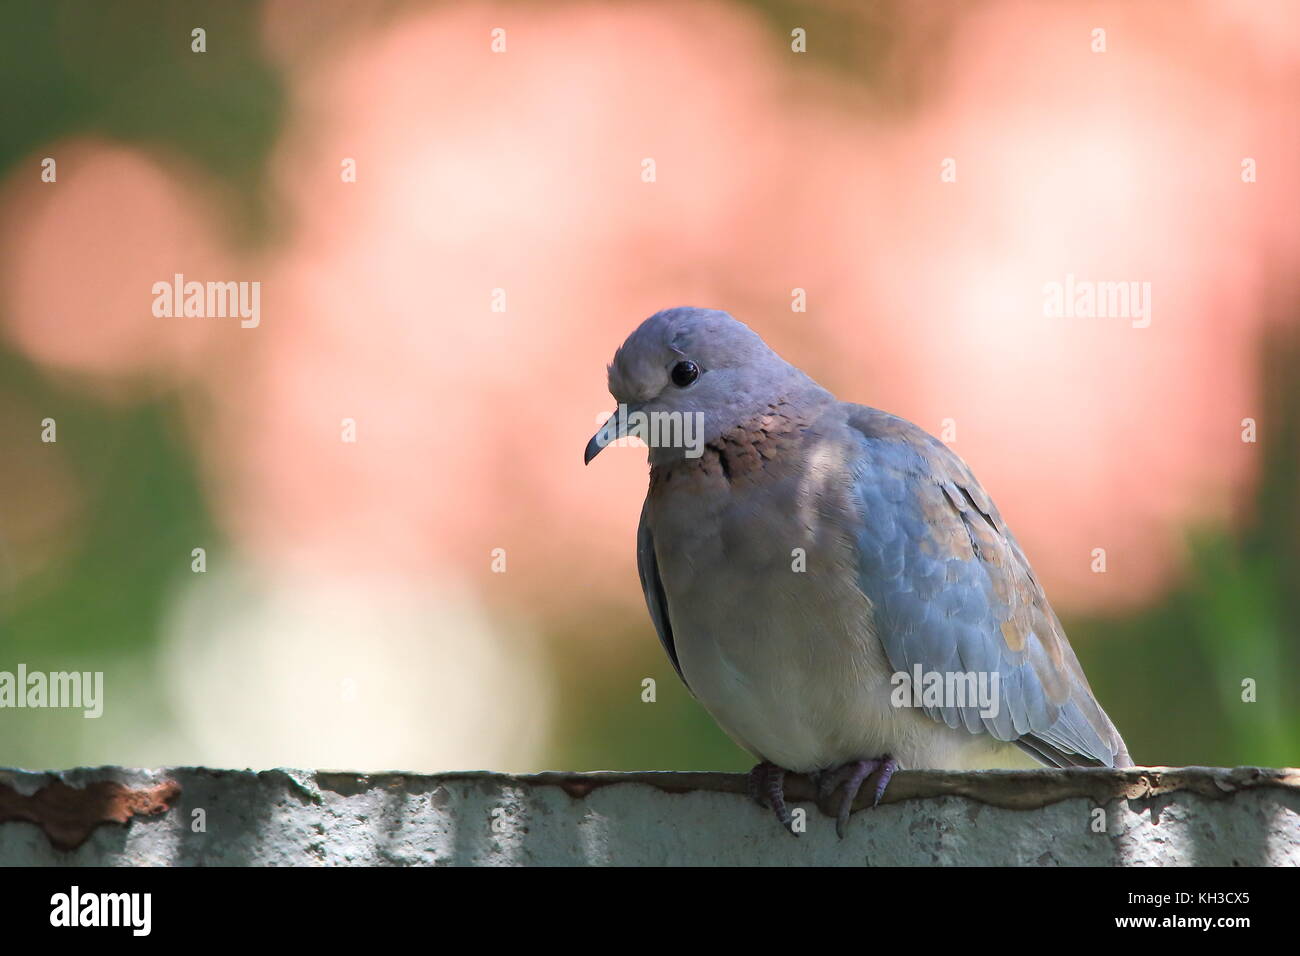 Small dove perched on a cement wall in an urban environment in landscape format with copy space Stock Photo